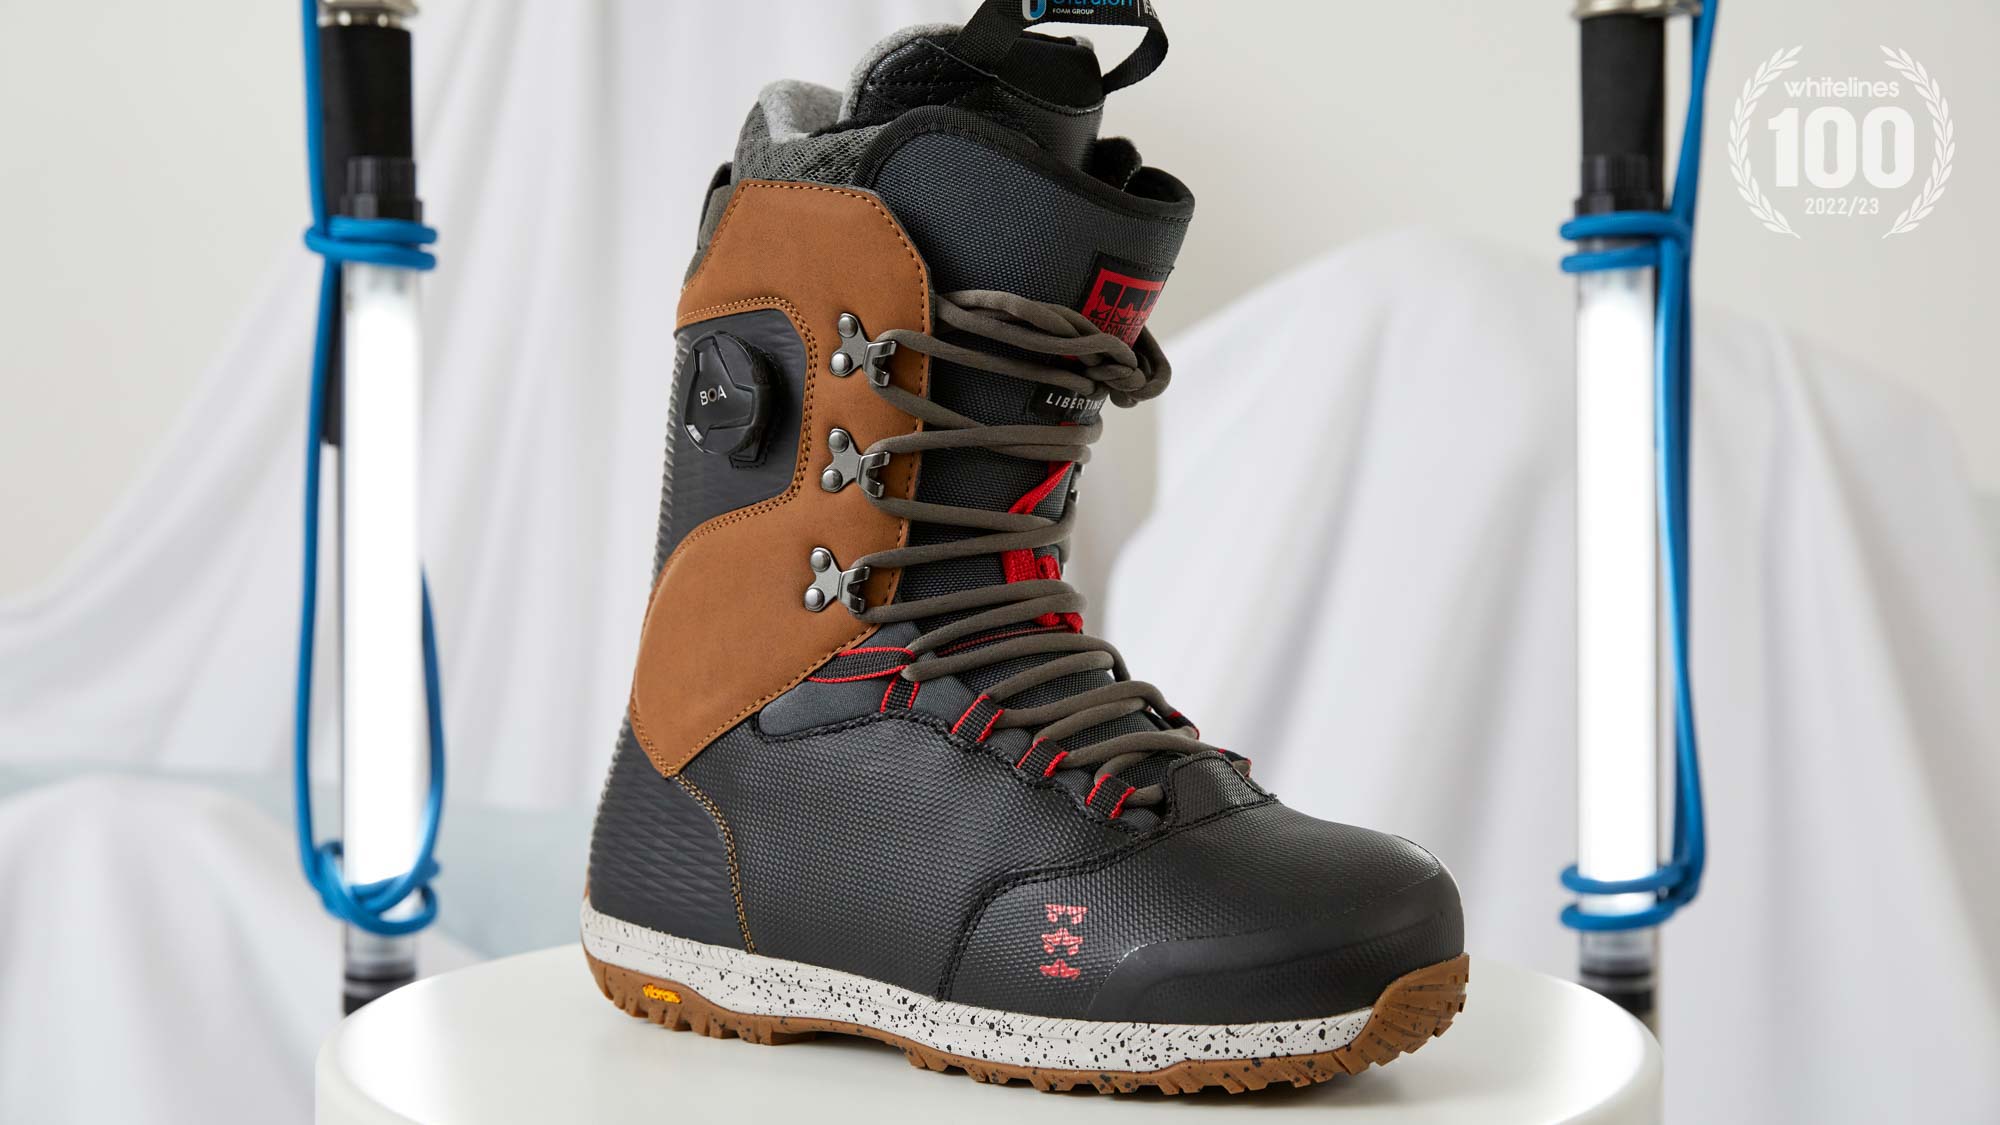 Rome Libertine 2022-2023 Snowboard Boots Review - Wh